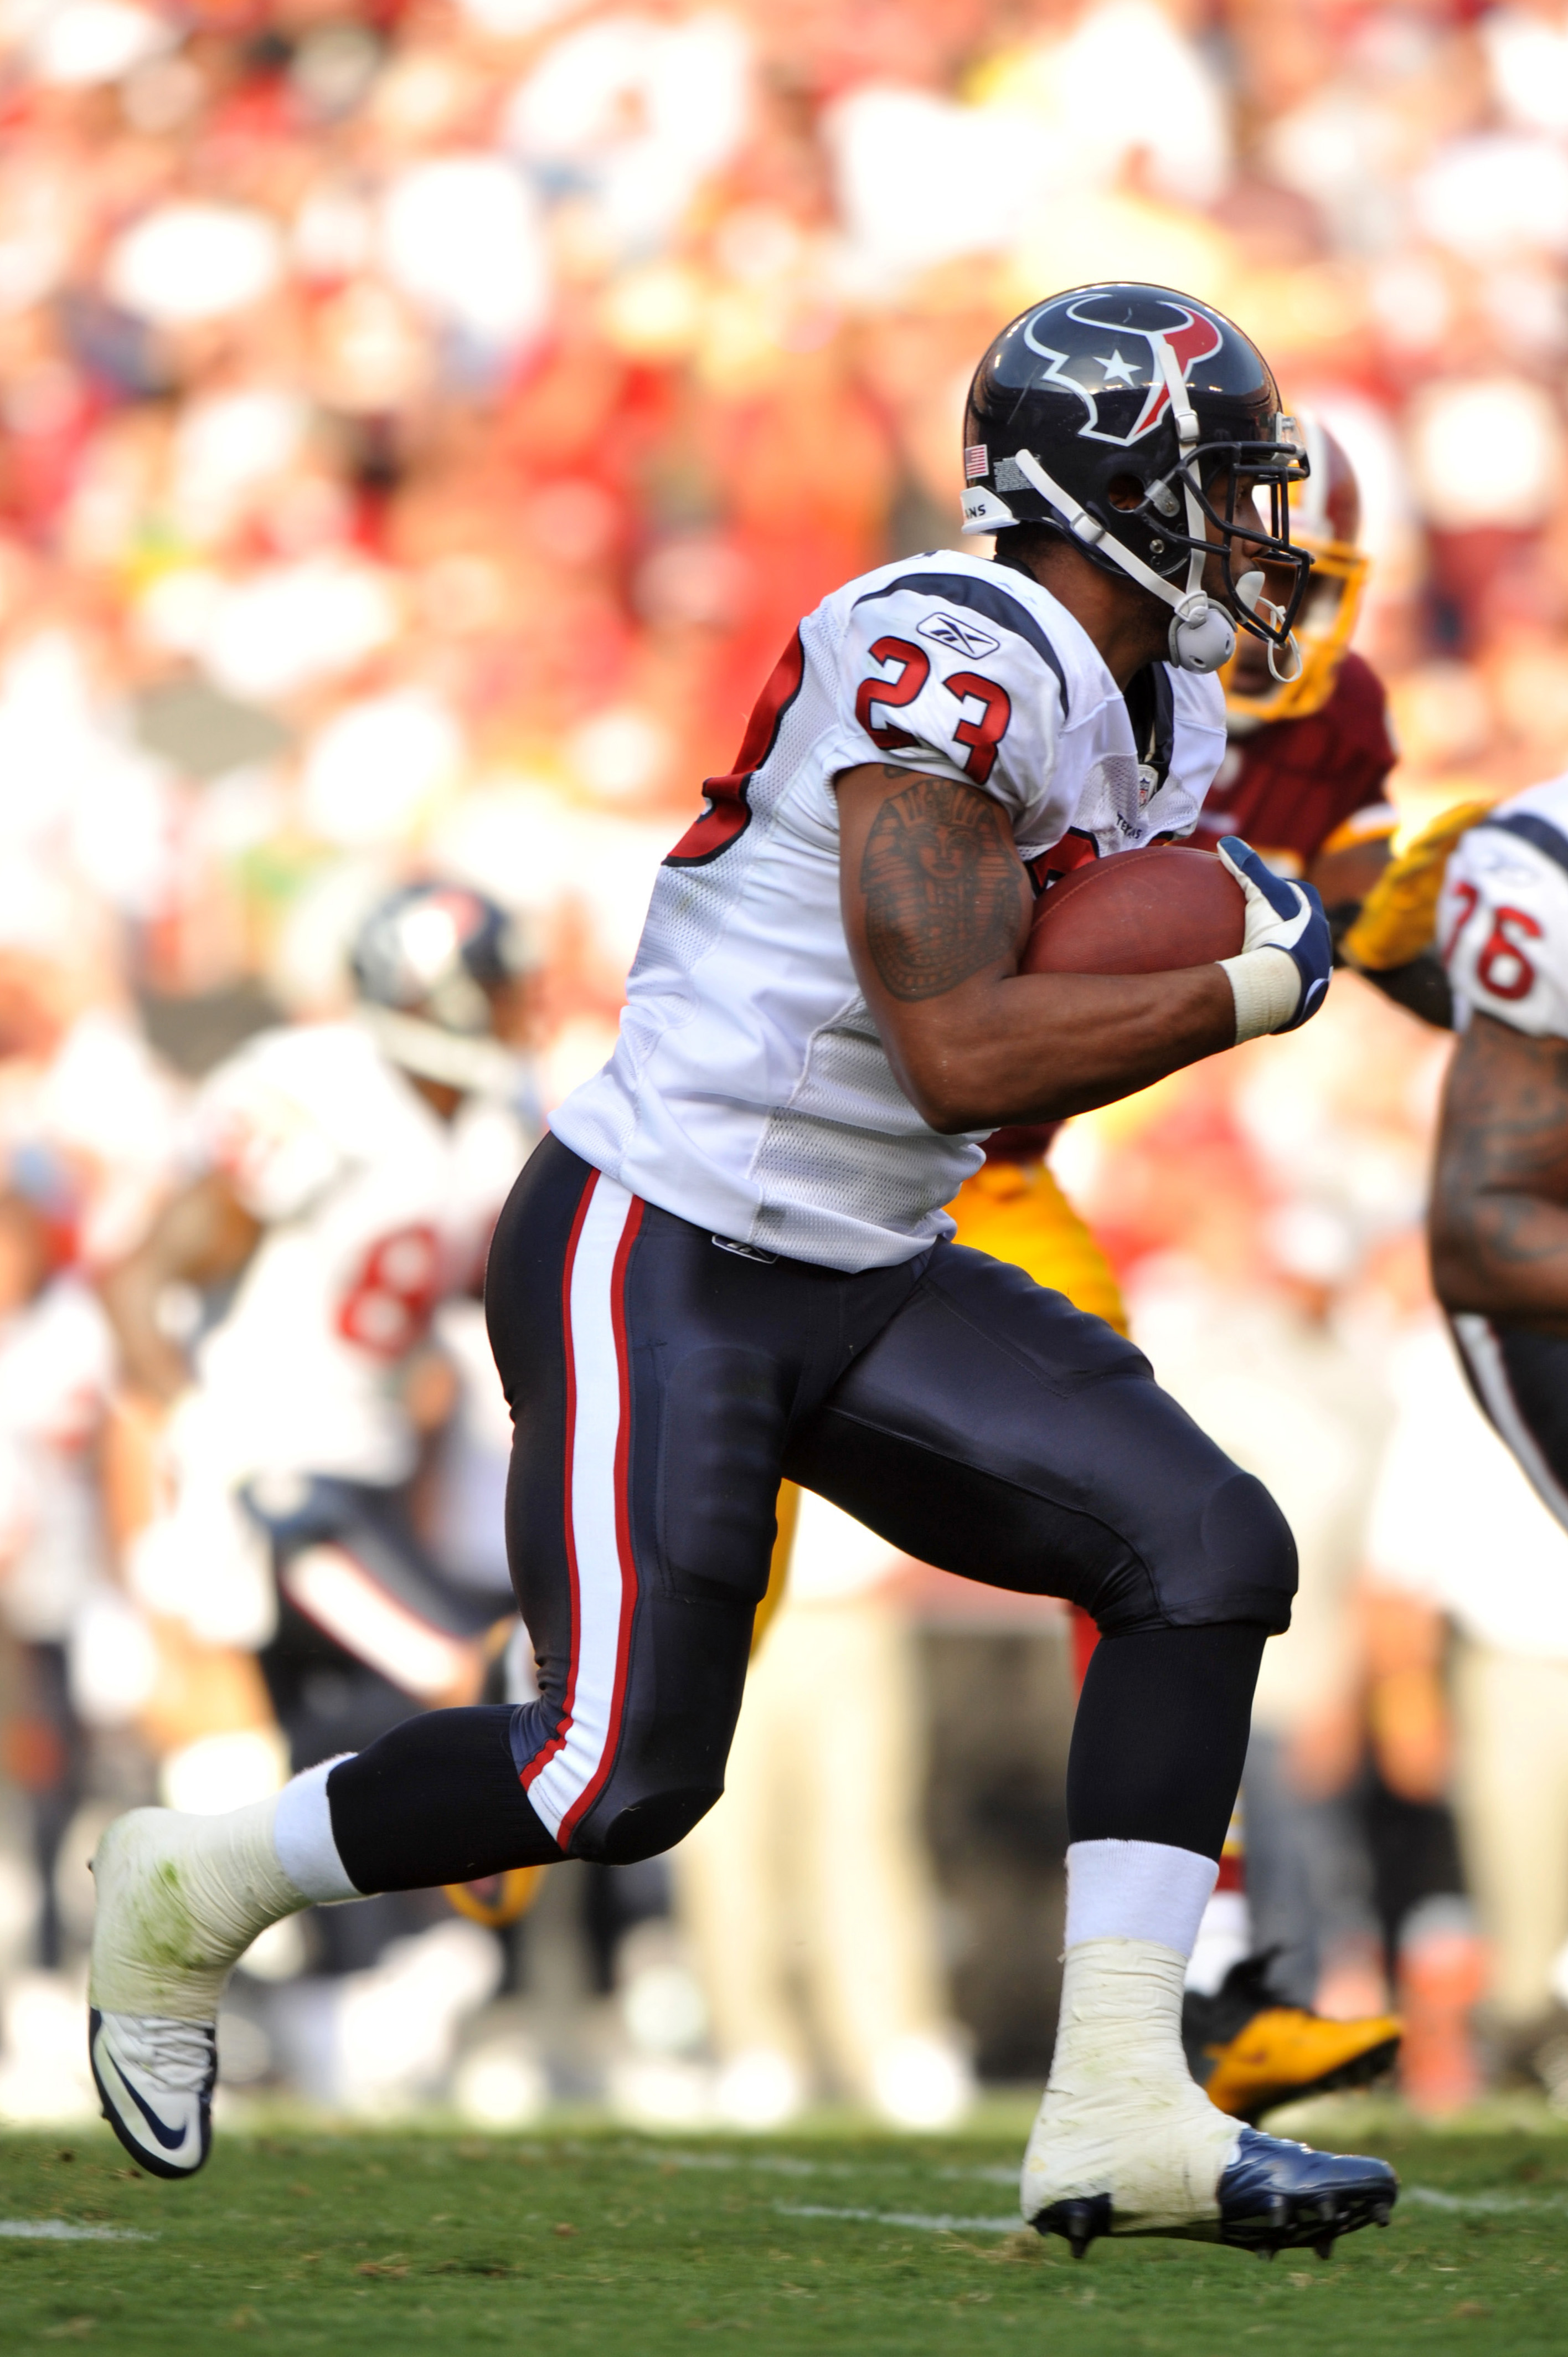 LANDOVER - SEPTEMBER 19:  Arian Foster #23 of the Houston Texans runs the ball against the Washington Redskins at FedExField on September 19, 2010 in Landover, Maryland. The Texans defeated the Redskins 30-27 in overtime. (Photo by Larry French/Getty Imag